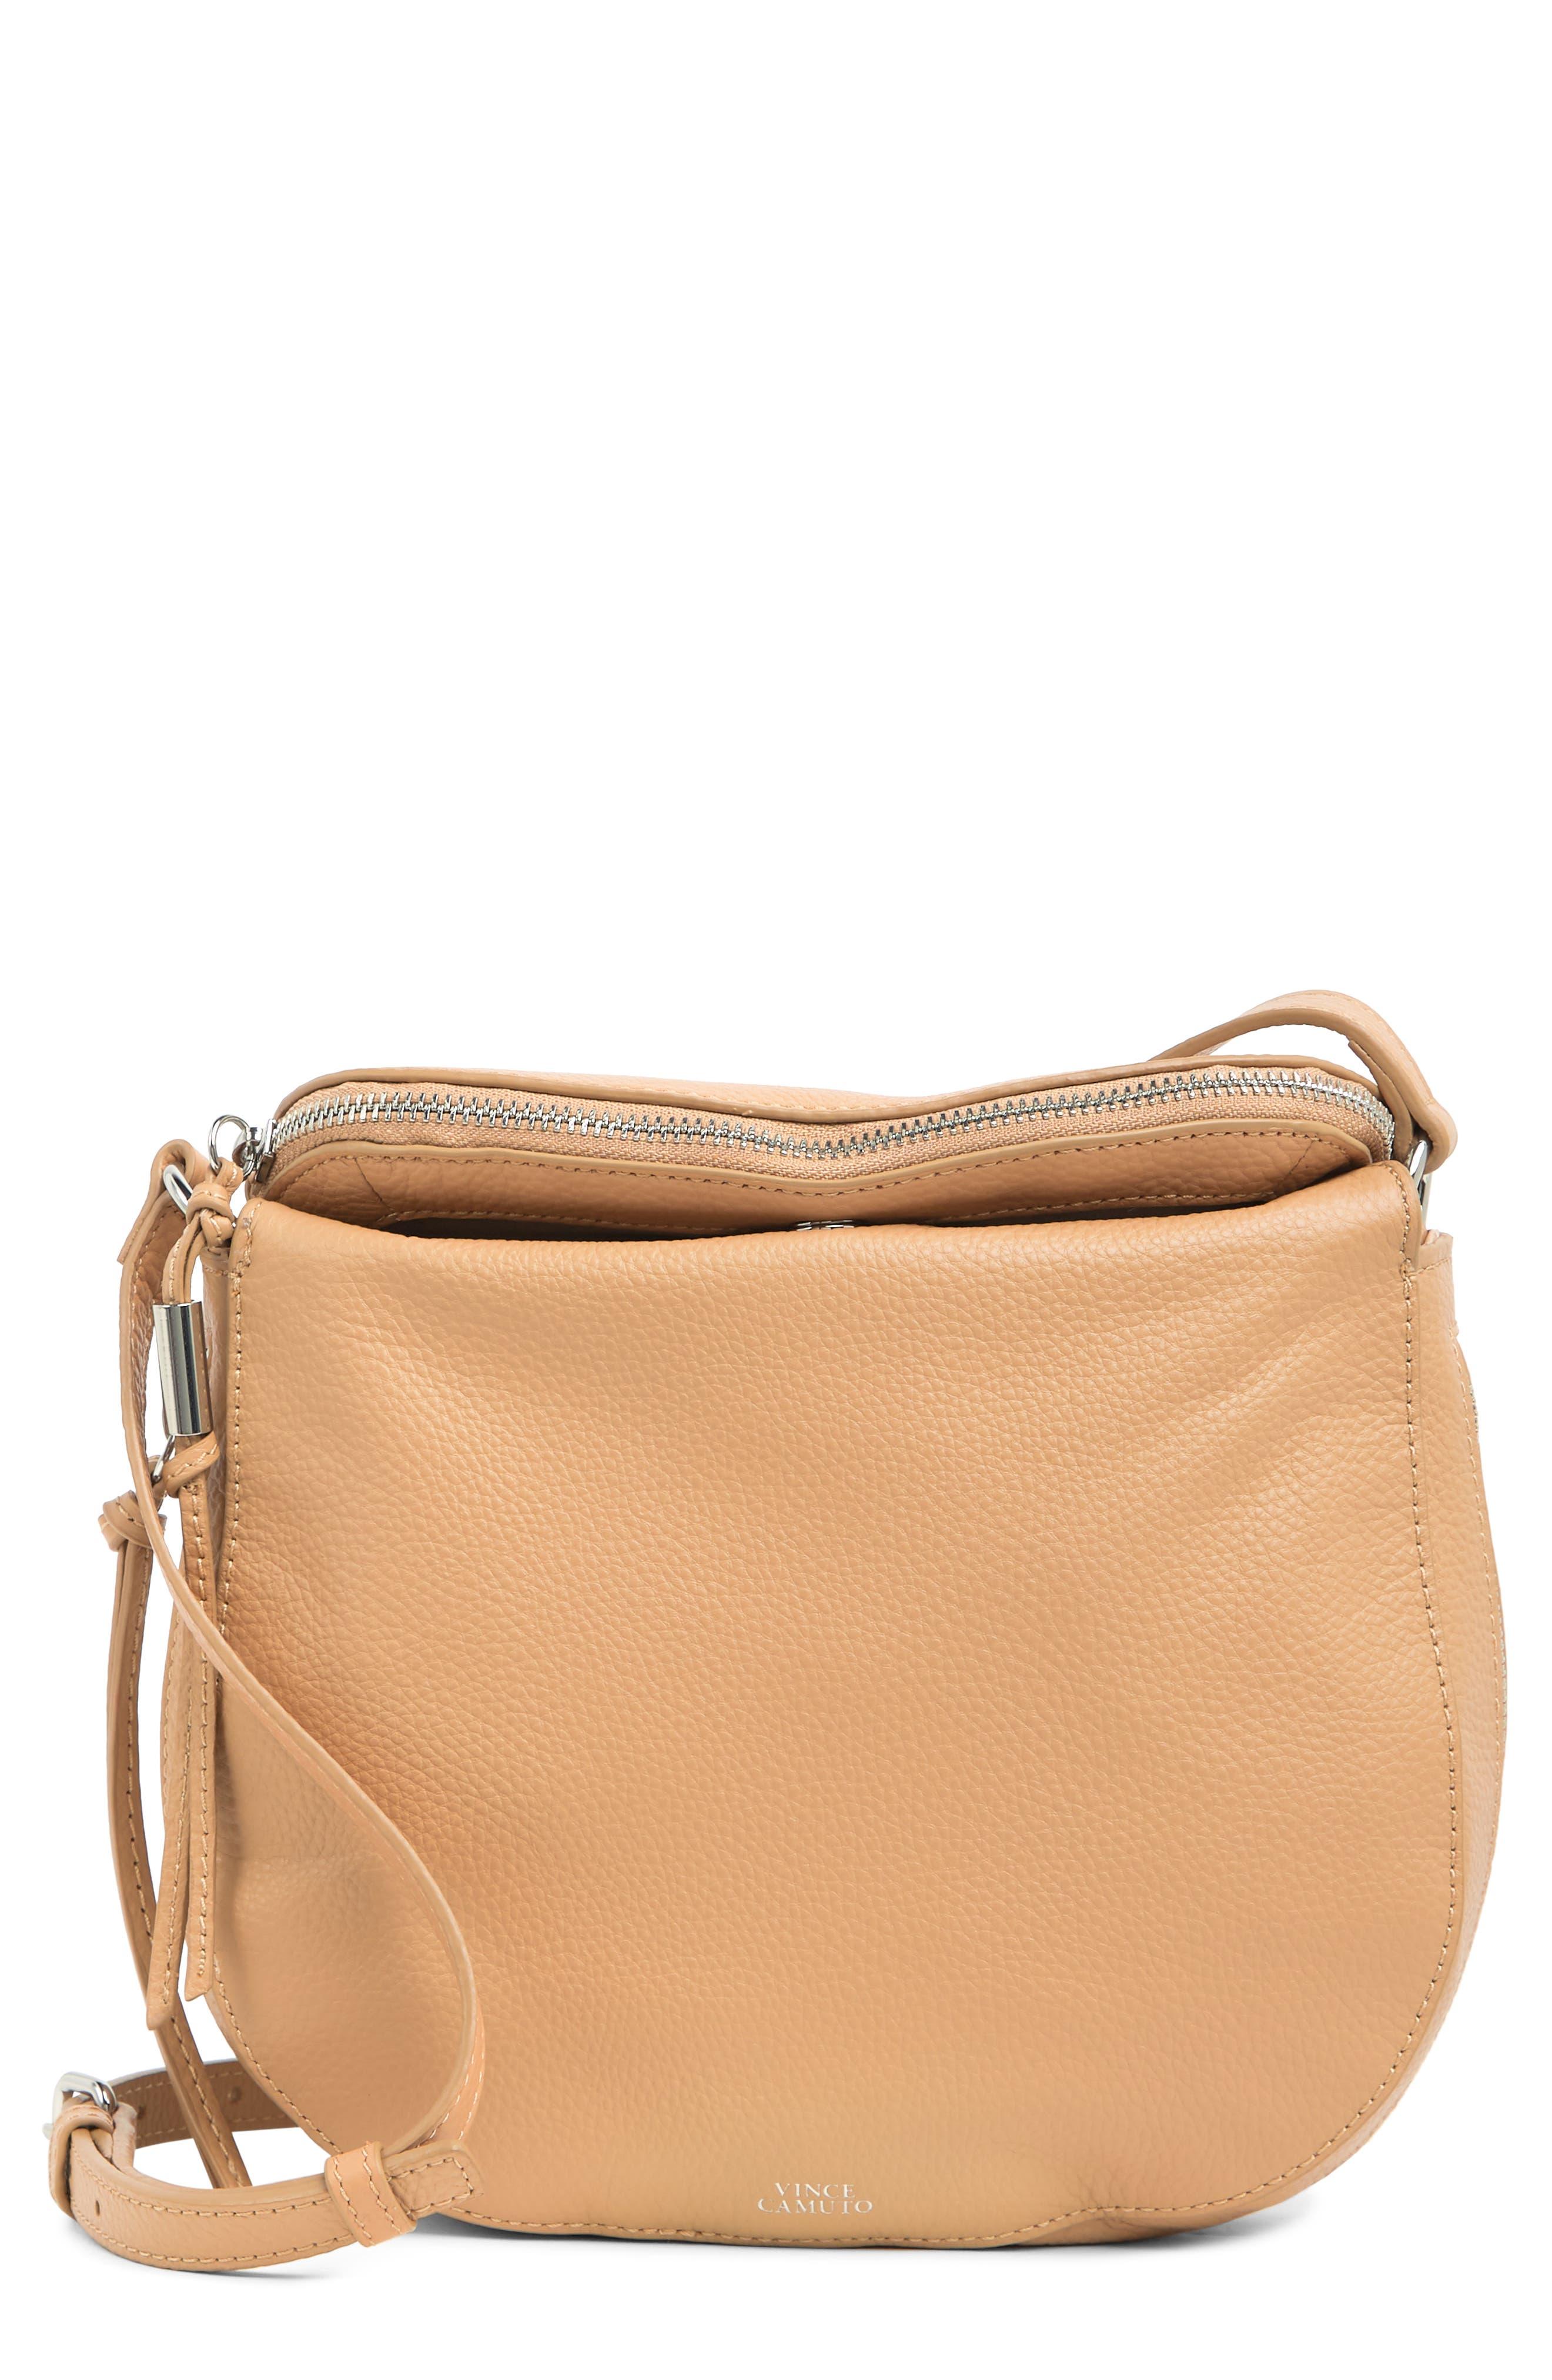 Vince Camuto Quilted Leather Crossbody -Doty